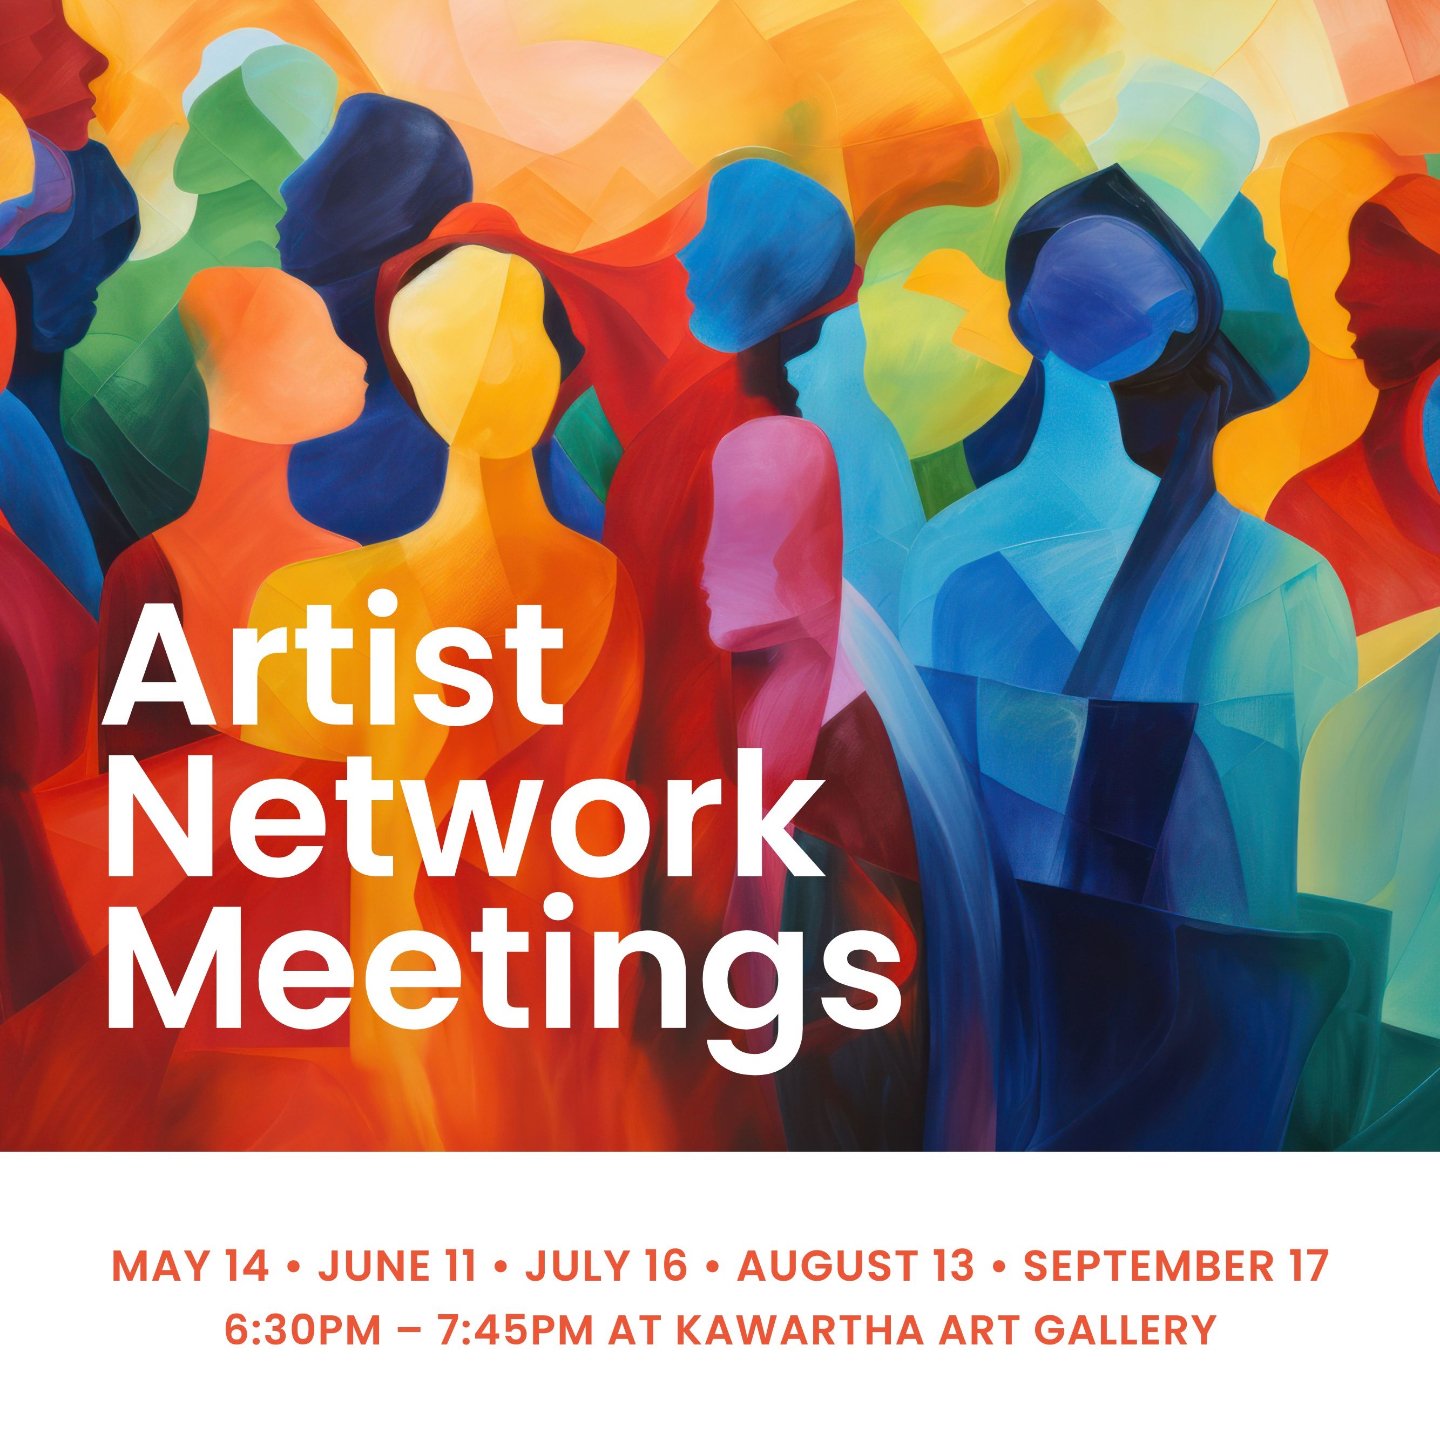 The Kawartha Art Gallery is delighted to bring back its popular Artist Network Meetings! These informal get-togethers are a chance for local visual artists to meet, network, and share ideas 💡

You do not need to be a KAG member to attend! We wish to